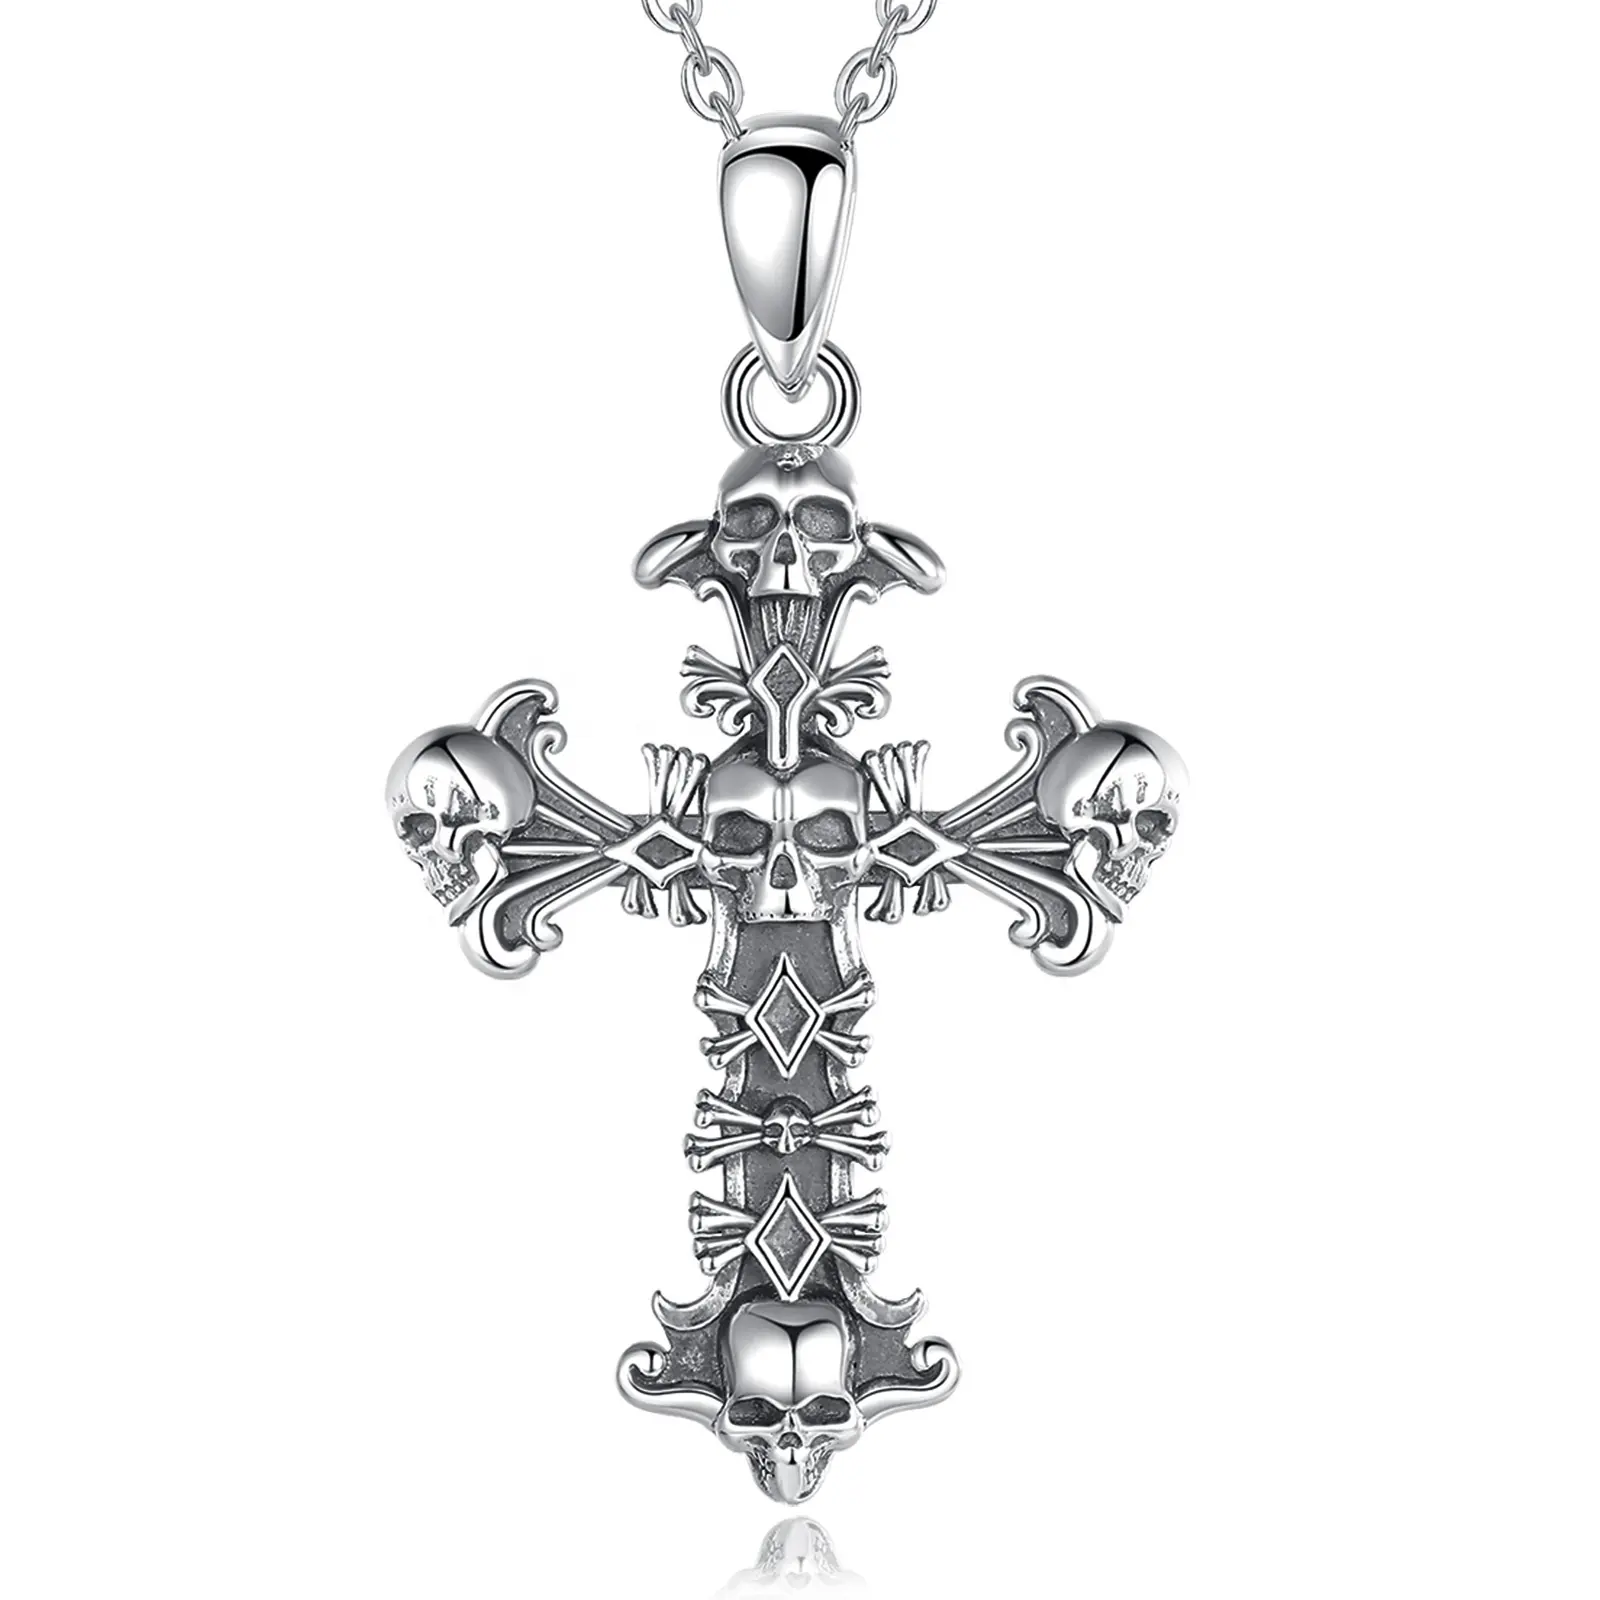 Merryshine S925 Sterling Silver Punk Ghotic Skull Cross Pendant Necklaces for Men and Women